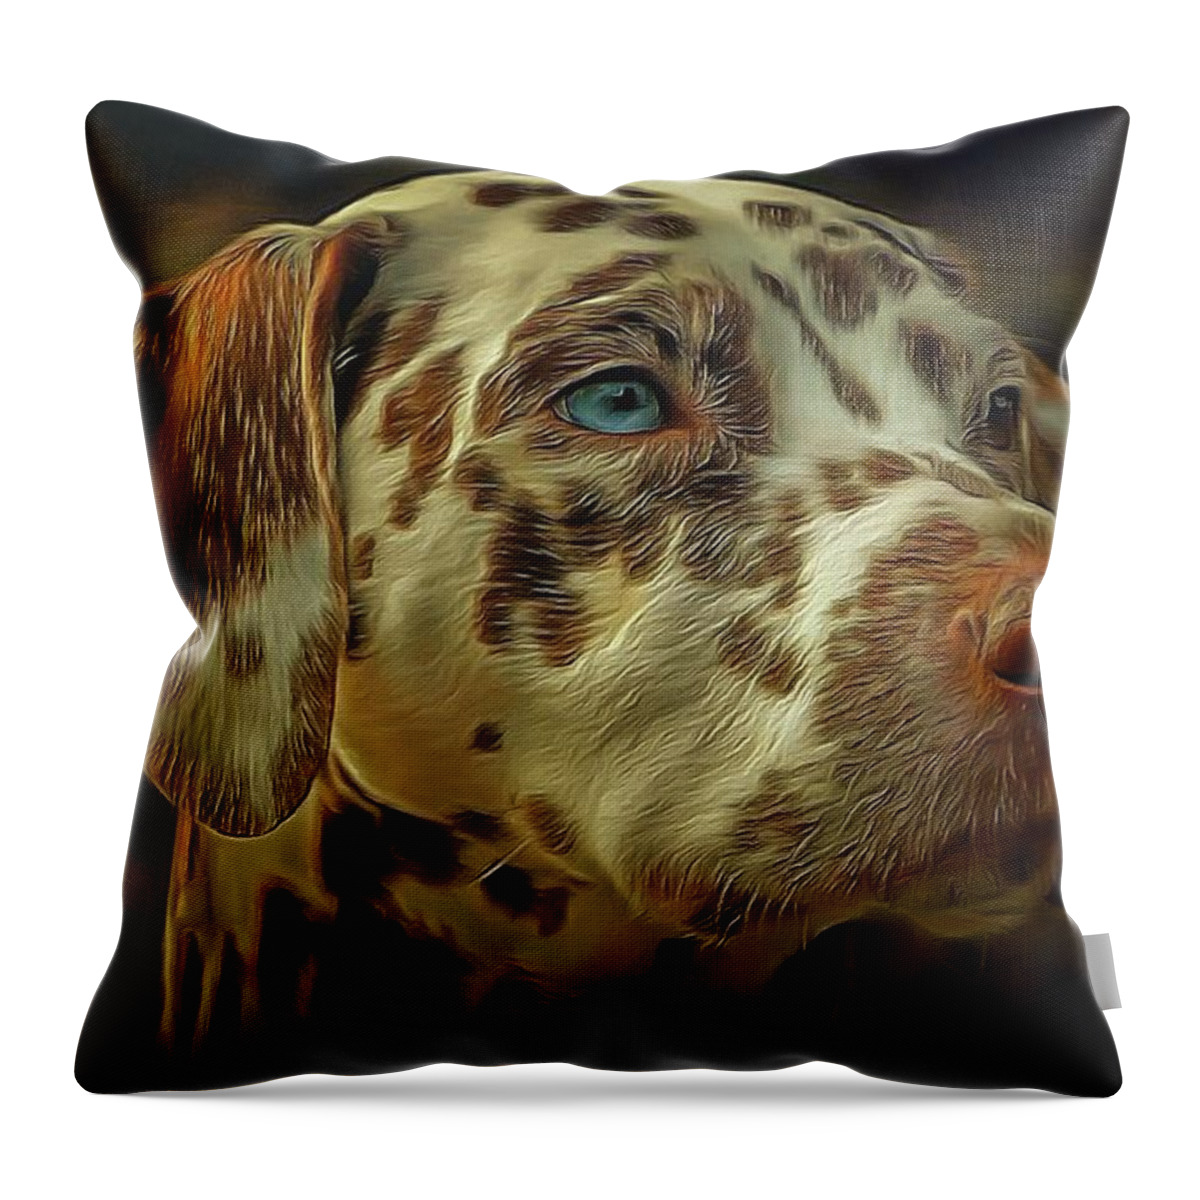 Sunset Throw Pillow featuring the digital art Gazing into the Sunset by Sarah Sever